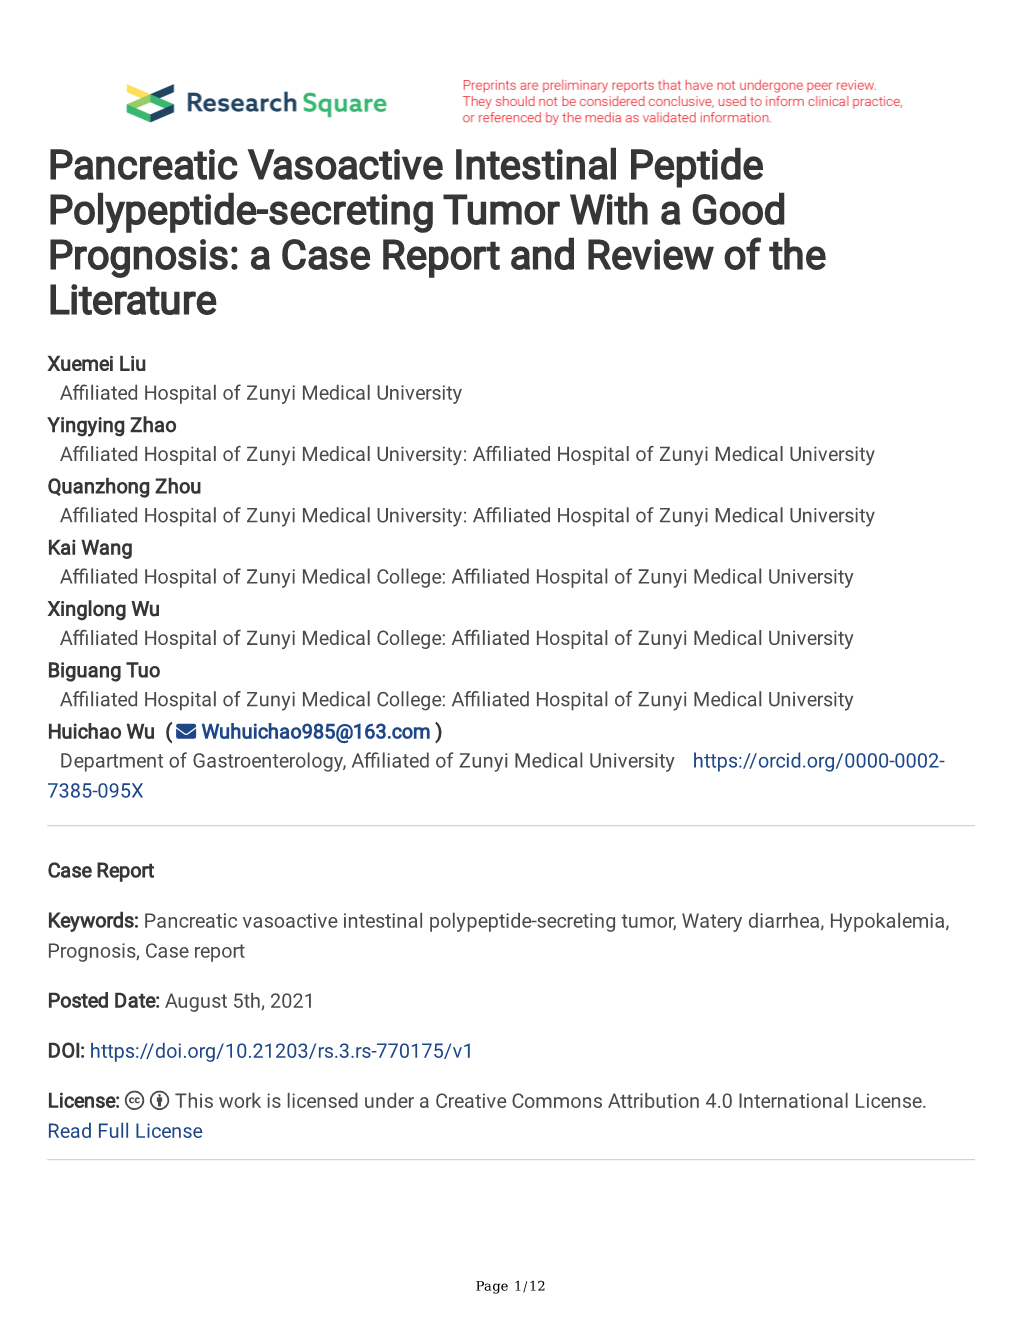 Pancreatic Vasoactive Intestinal Peptide Polypeptide-Secreting Tumor with a Good Prognosis: a Case Report and Review of the Literature